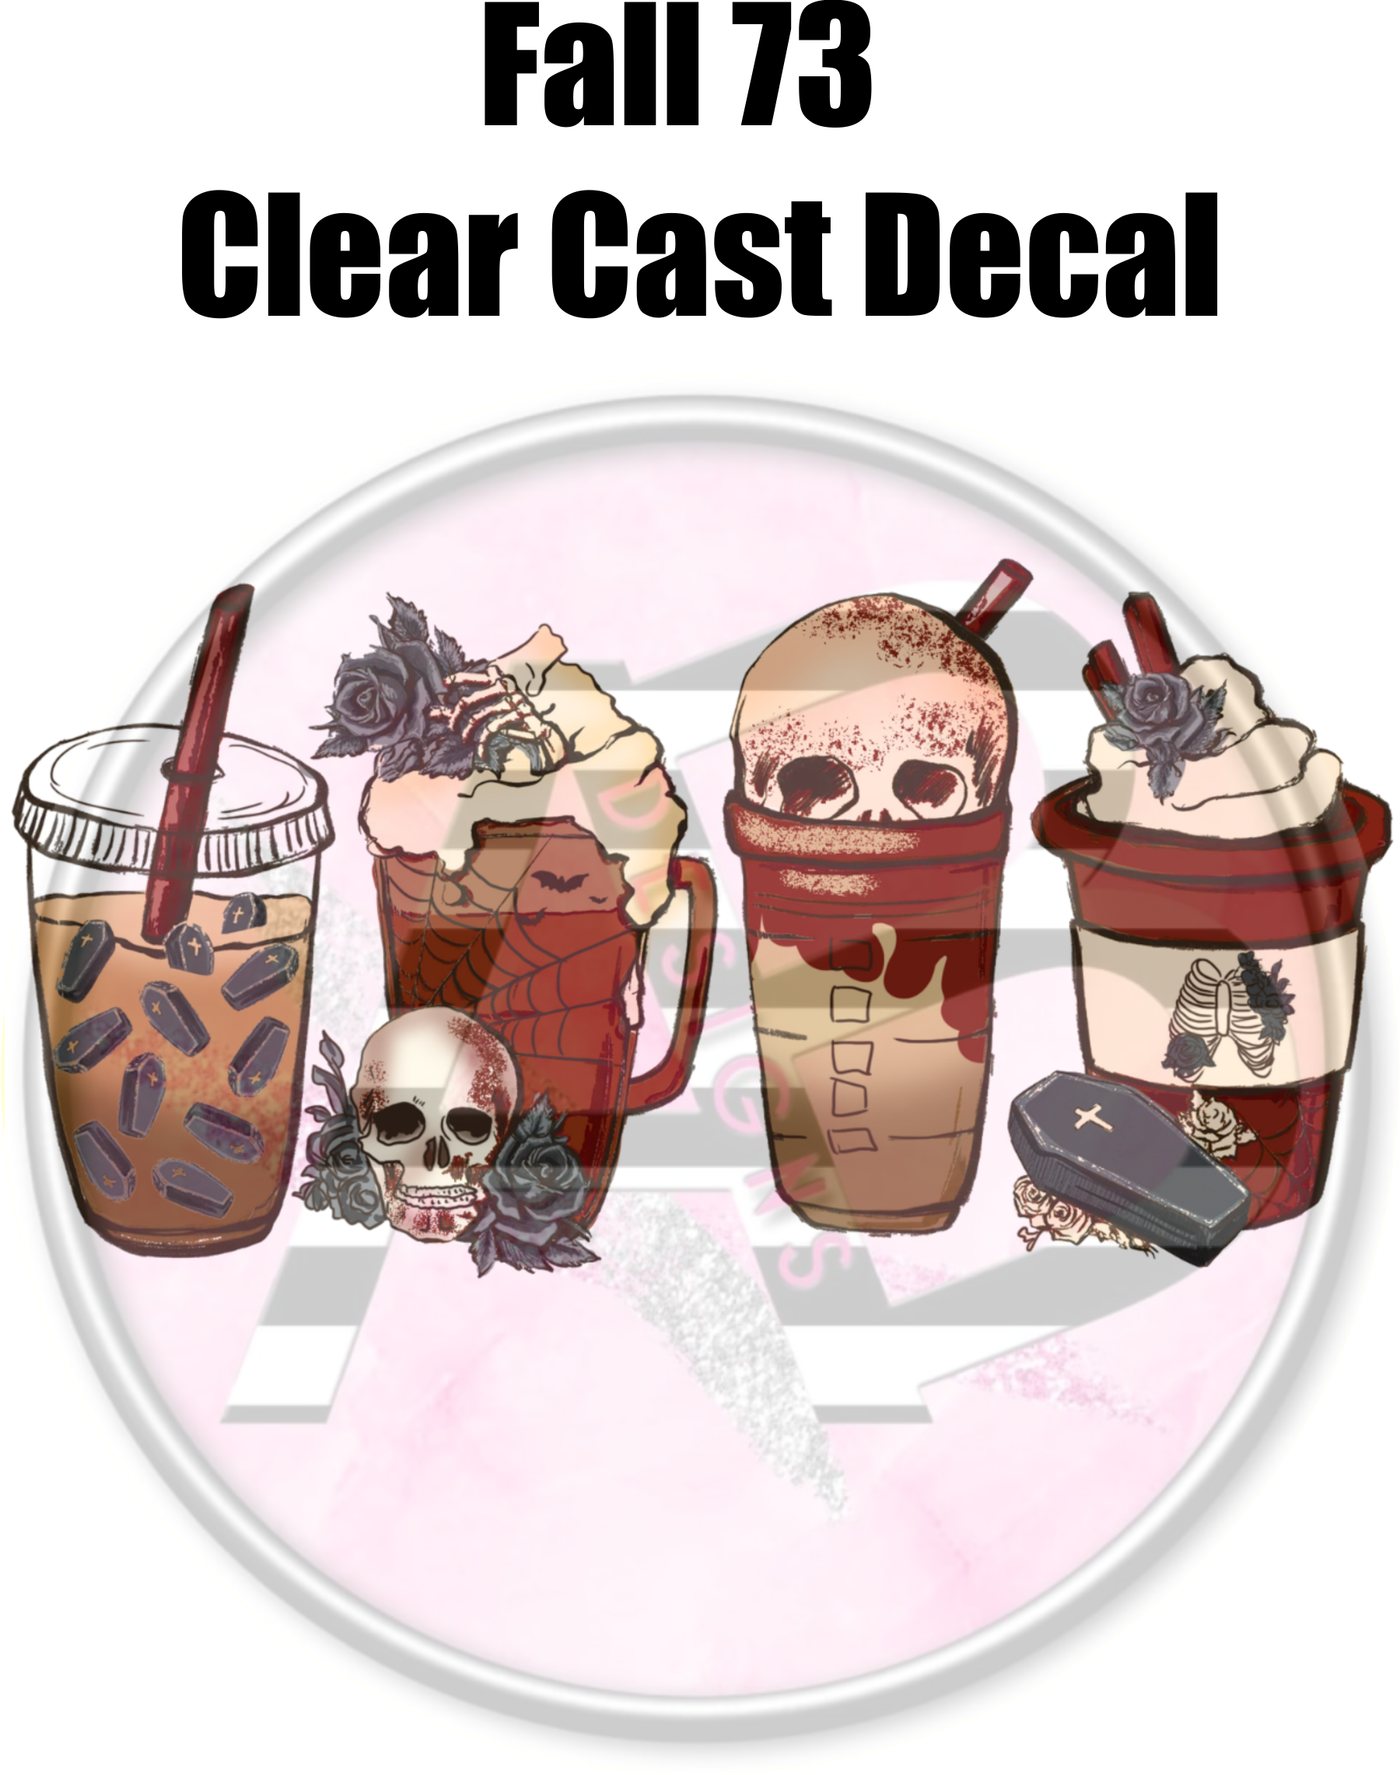 Fall 73 - Clear Cast Decal